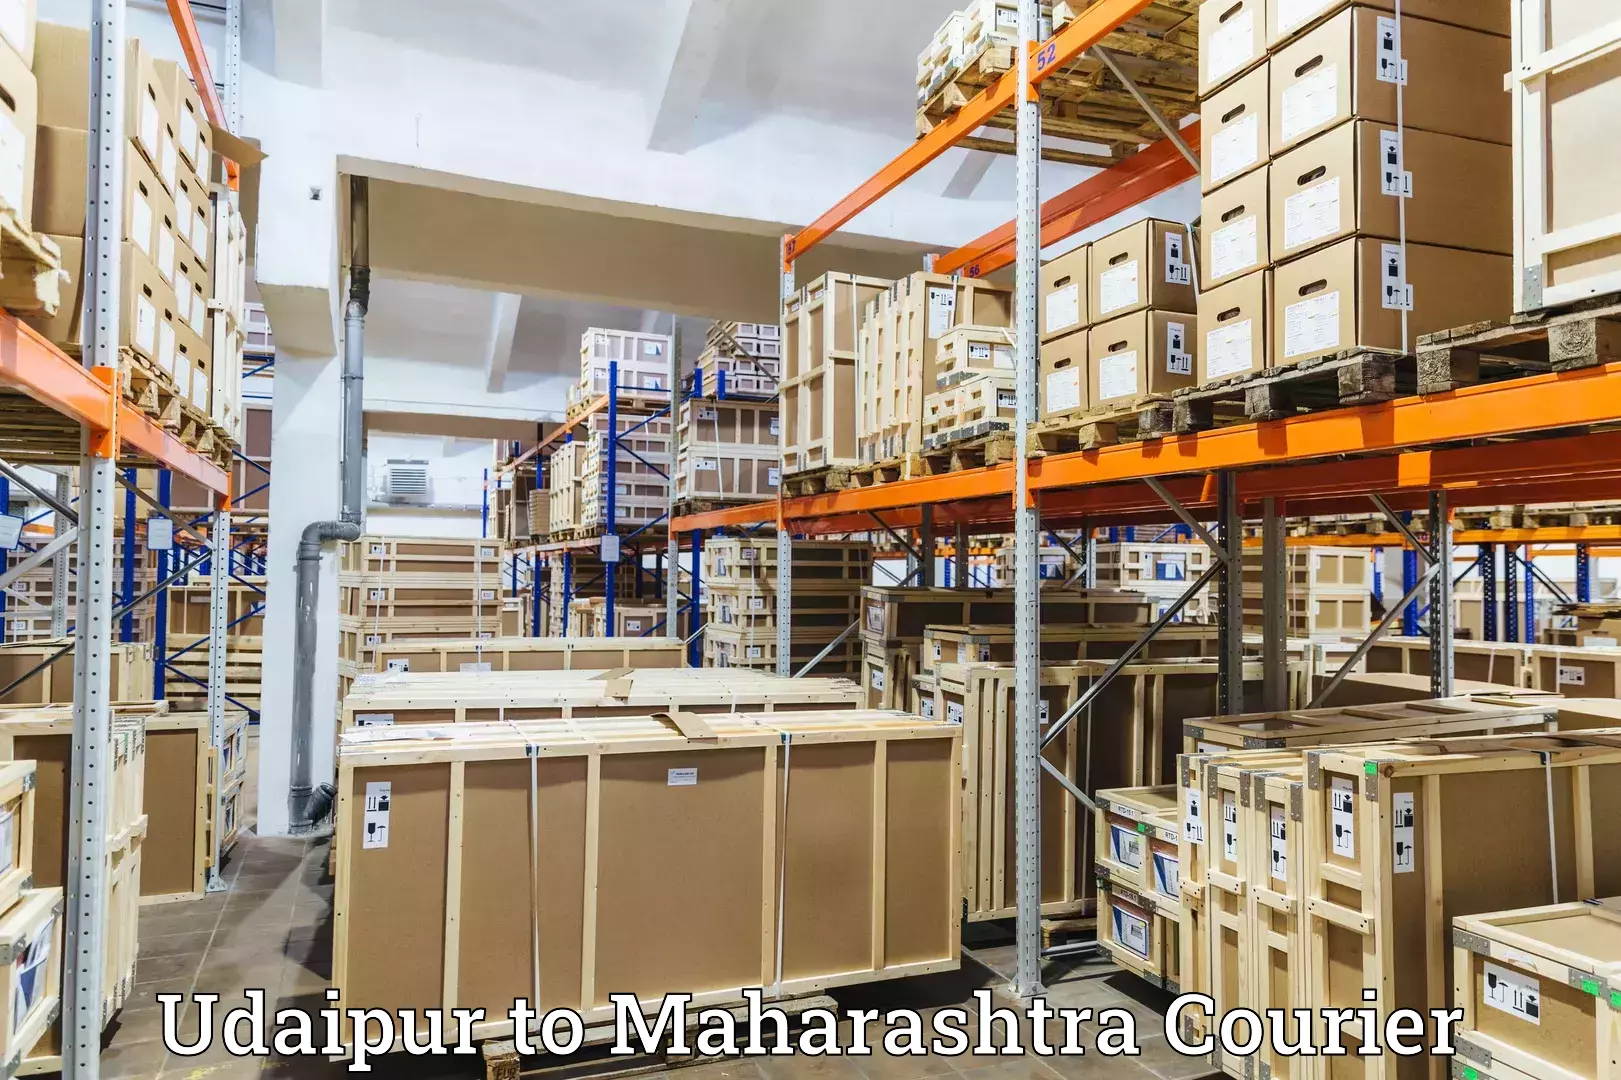 Reliable courier services in Udaipur to Satana